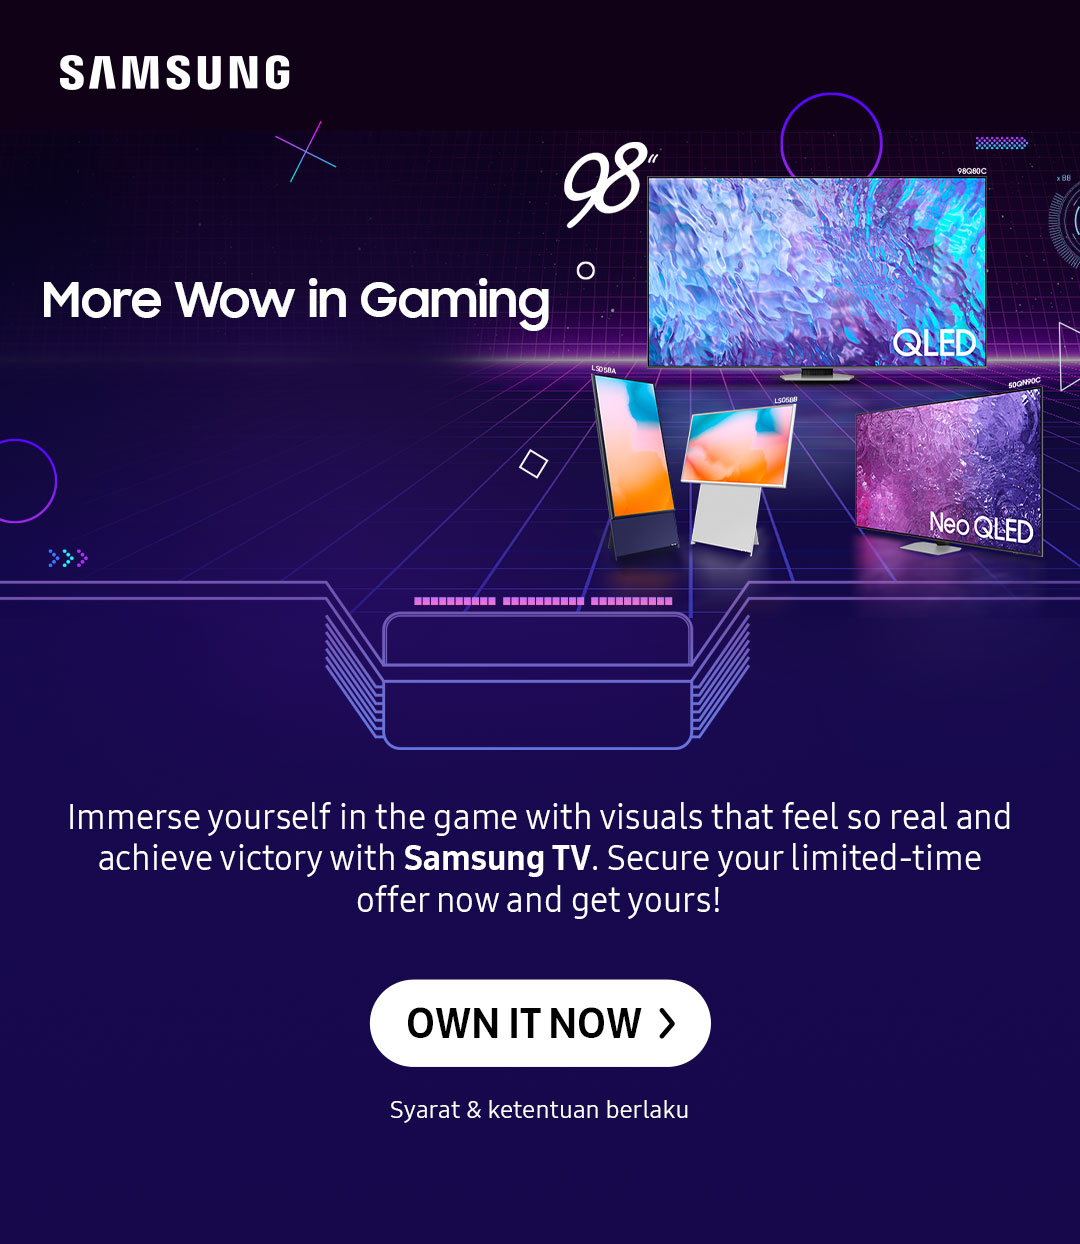 More WOW in Gaming | Immerse yourself in the game with visuals that feel so real and achieve victory with Samsung TV. Secure your limited-time offer now and get yours!